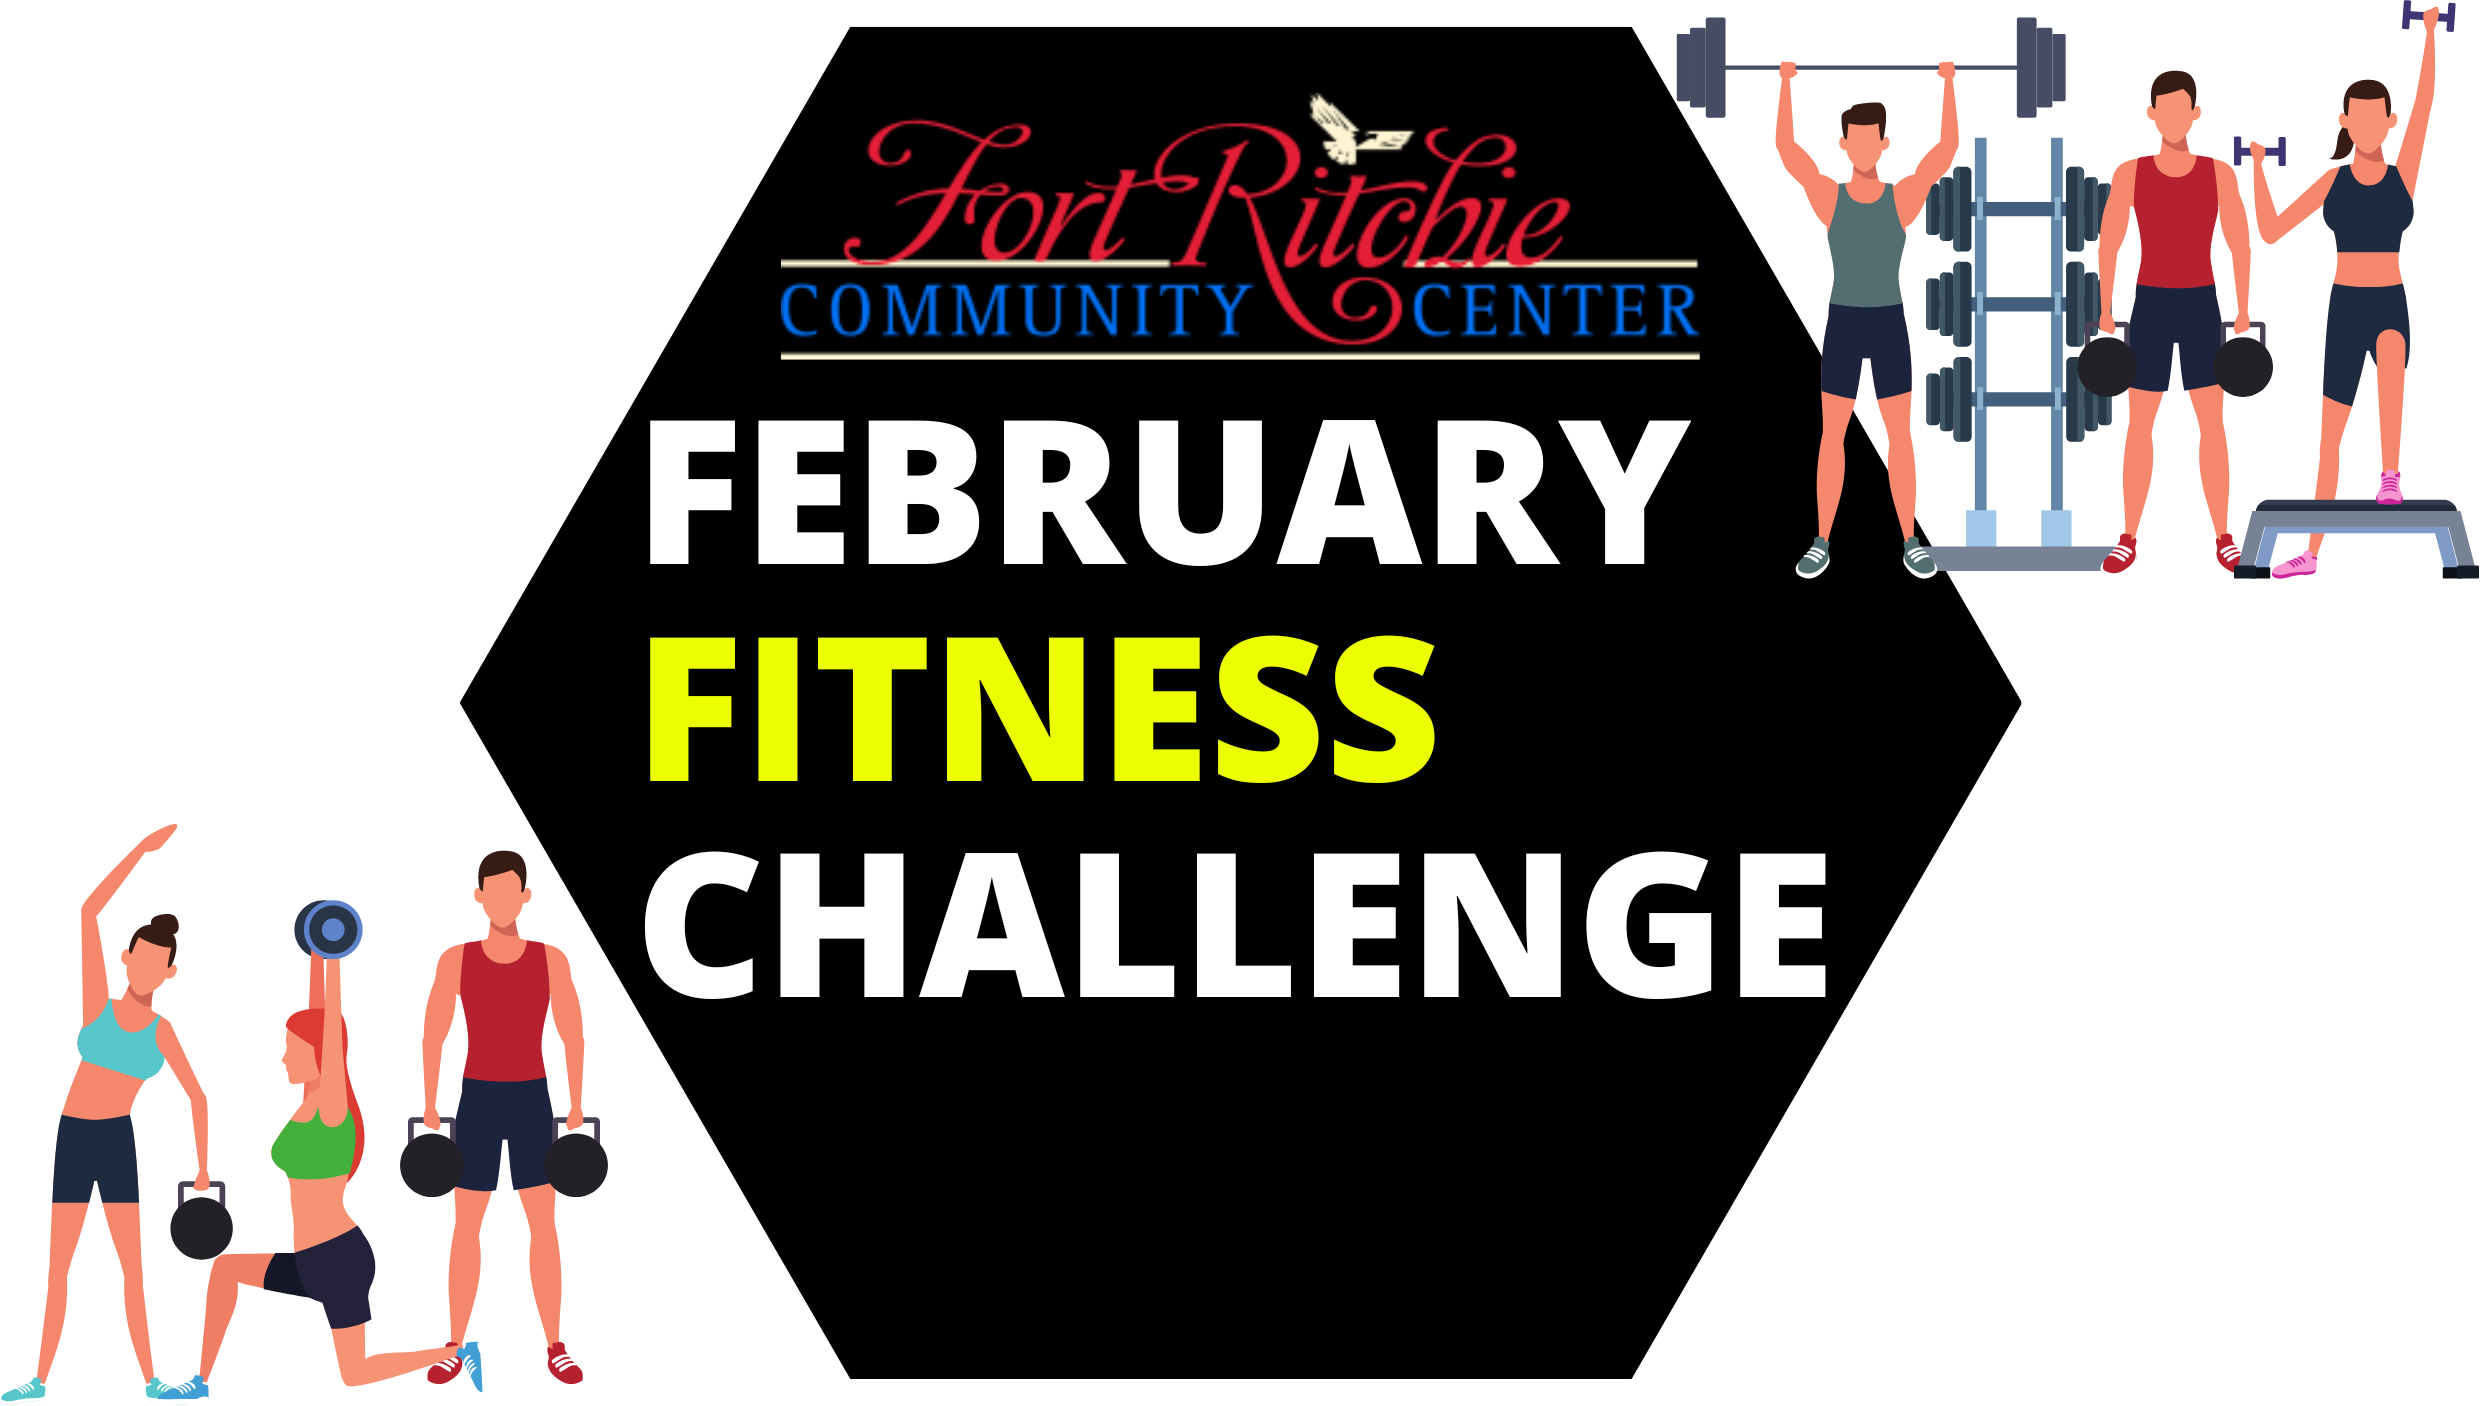 Fort Ritchie Community Center's February Fitness Challenge - graphic images of people exercising